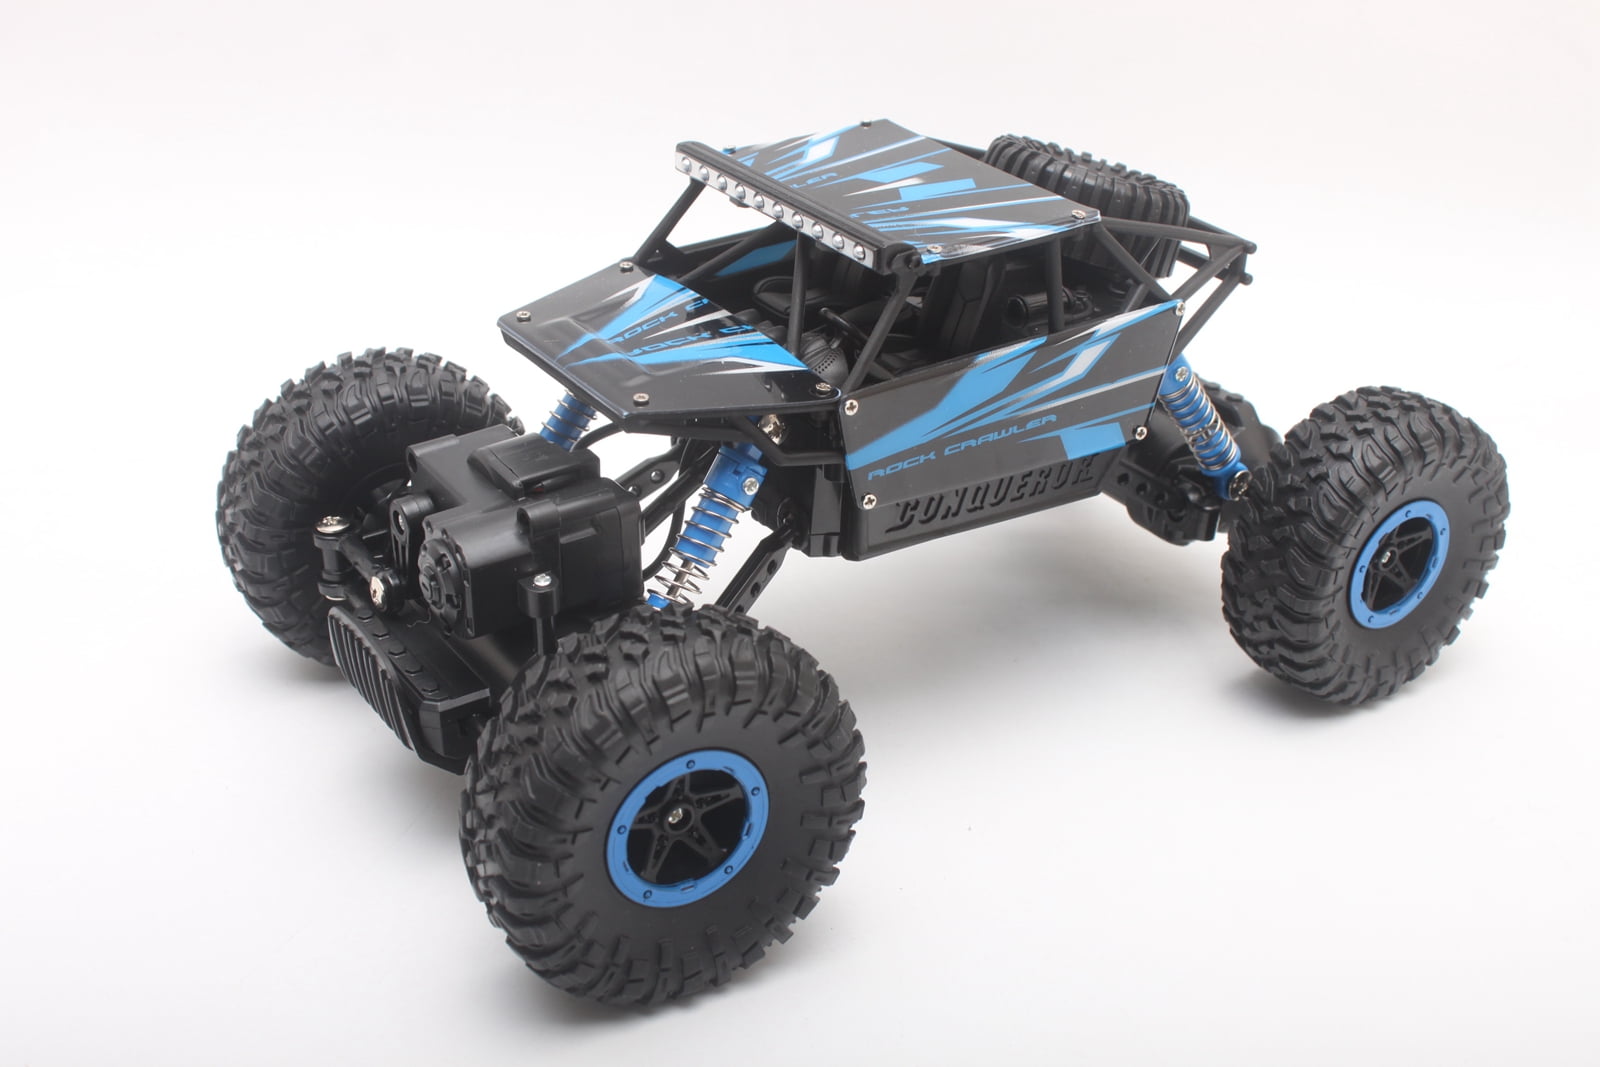 SPIDER MAN ROCK CRAWLER 2.4GHz RC REMOTE CONTROL CAR 4WD TRUCK 1/18 RECHARGEABLE 